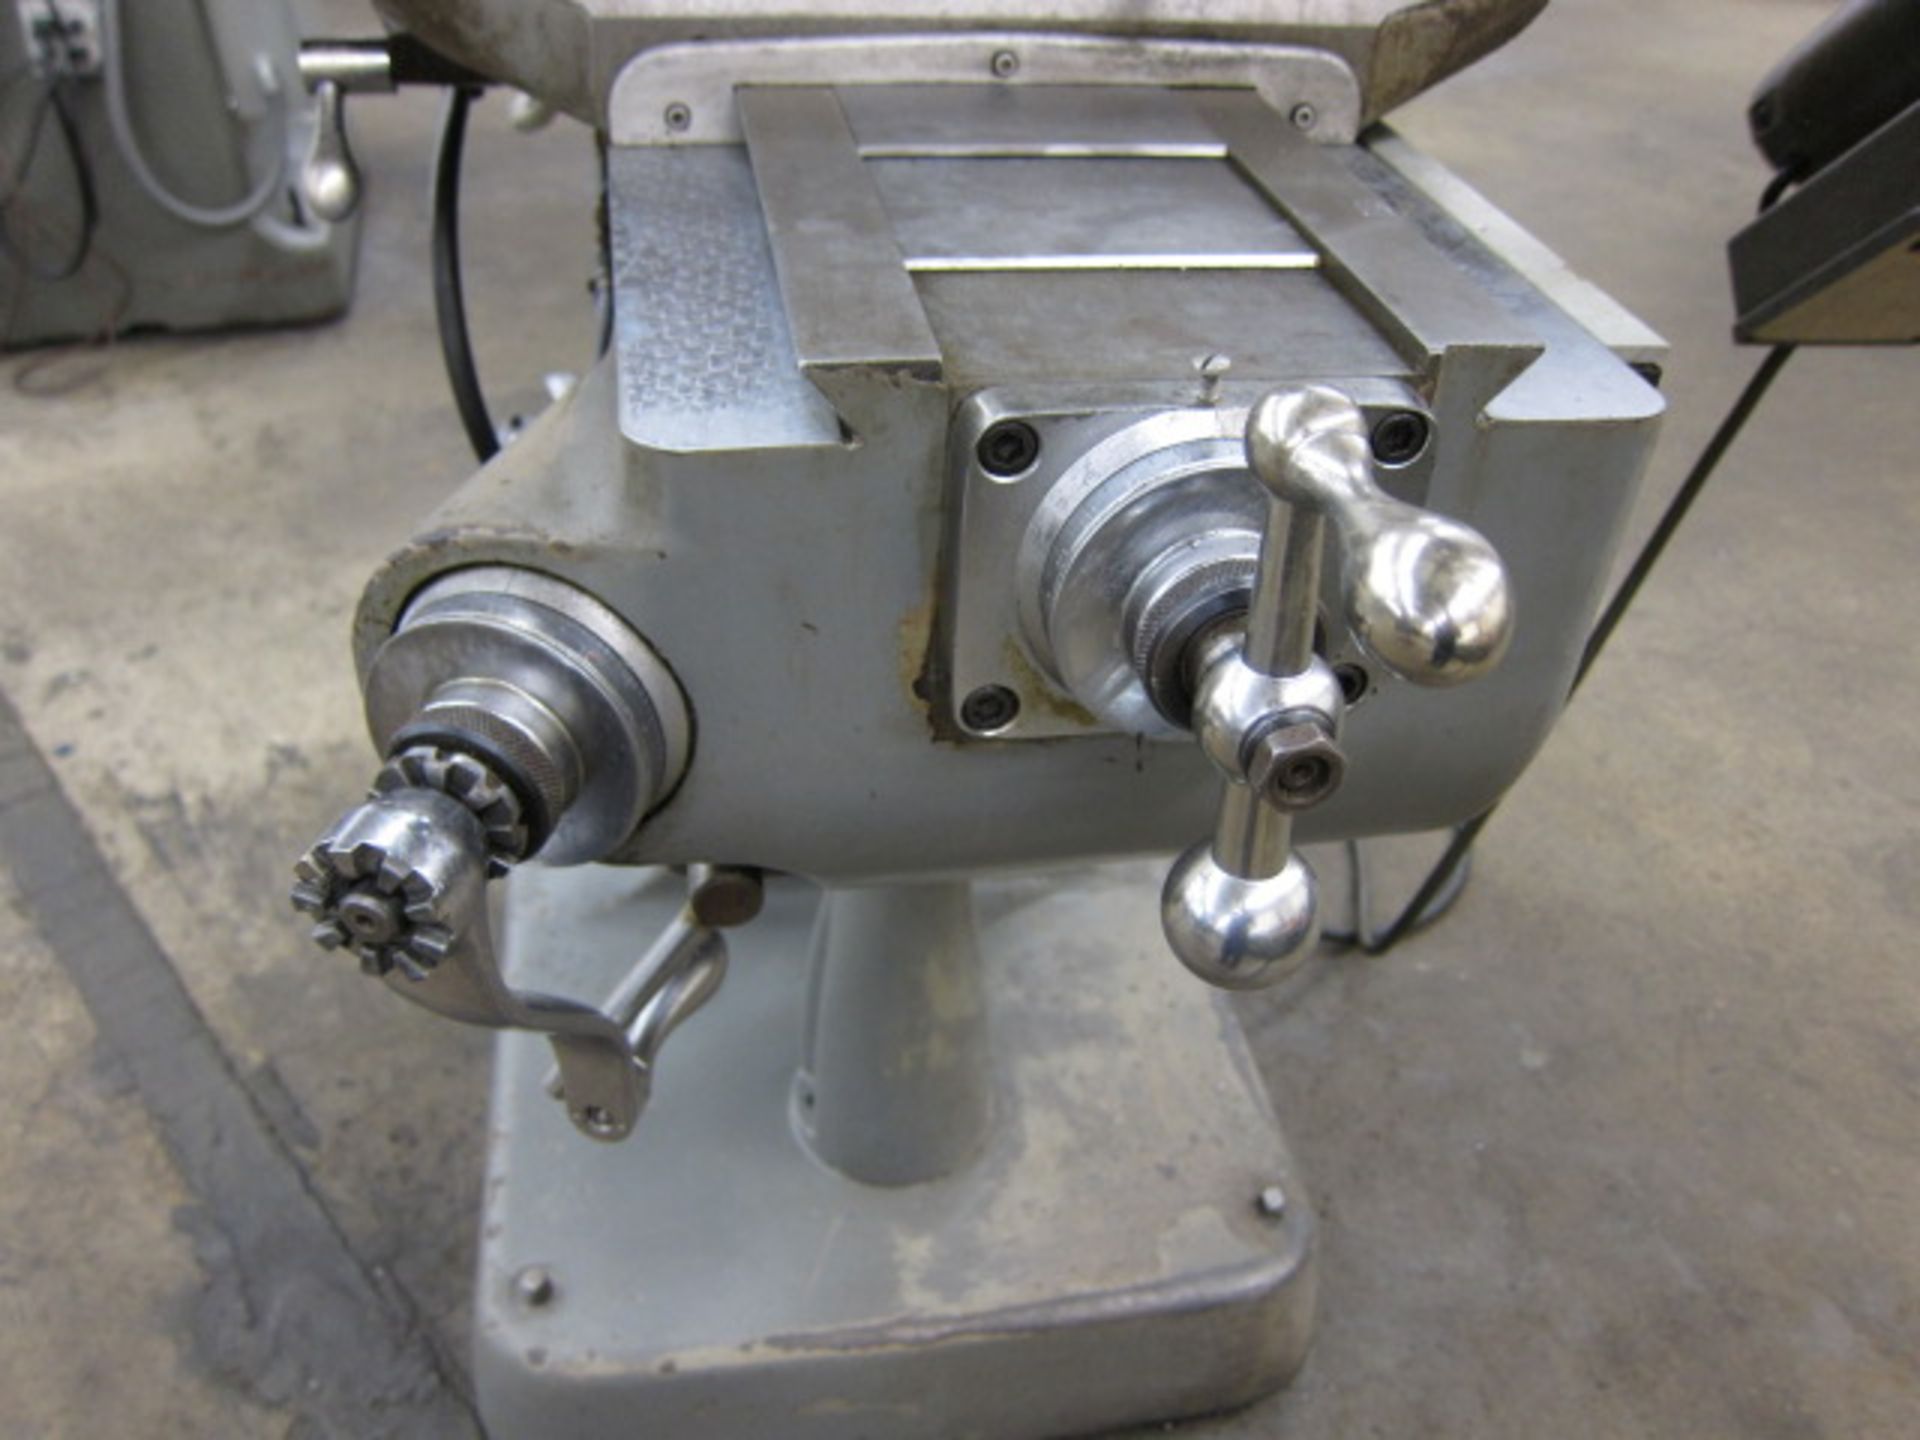 VERTICAL TURRET MILL, BRIDGEPORT SERIES I, 9” x 42” table, long. pwr. feed, 2 HP variable spd. head, - Image 6 of 6